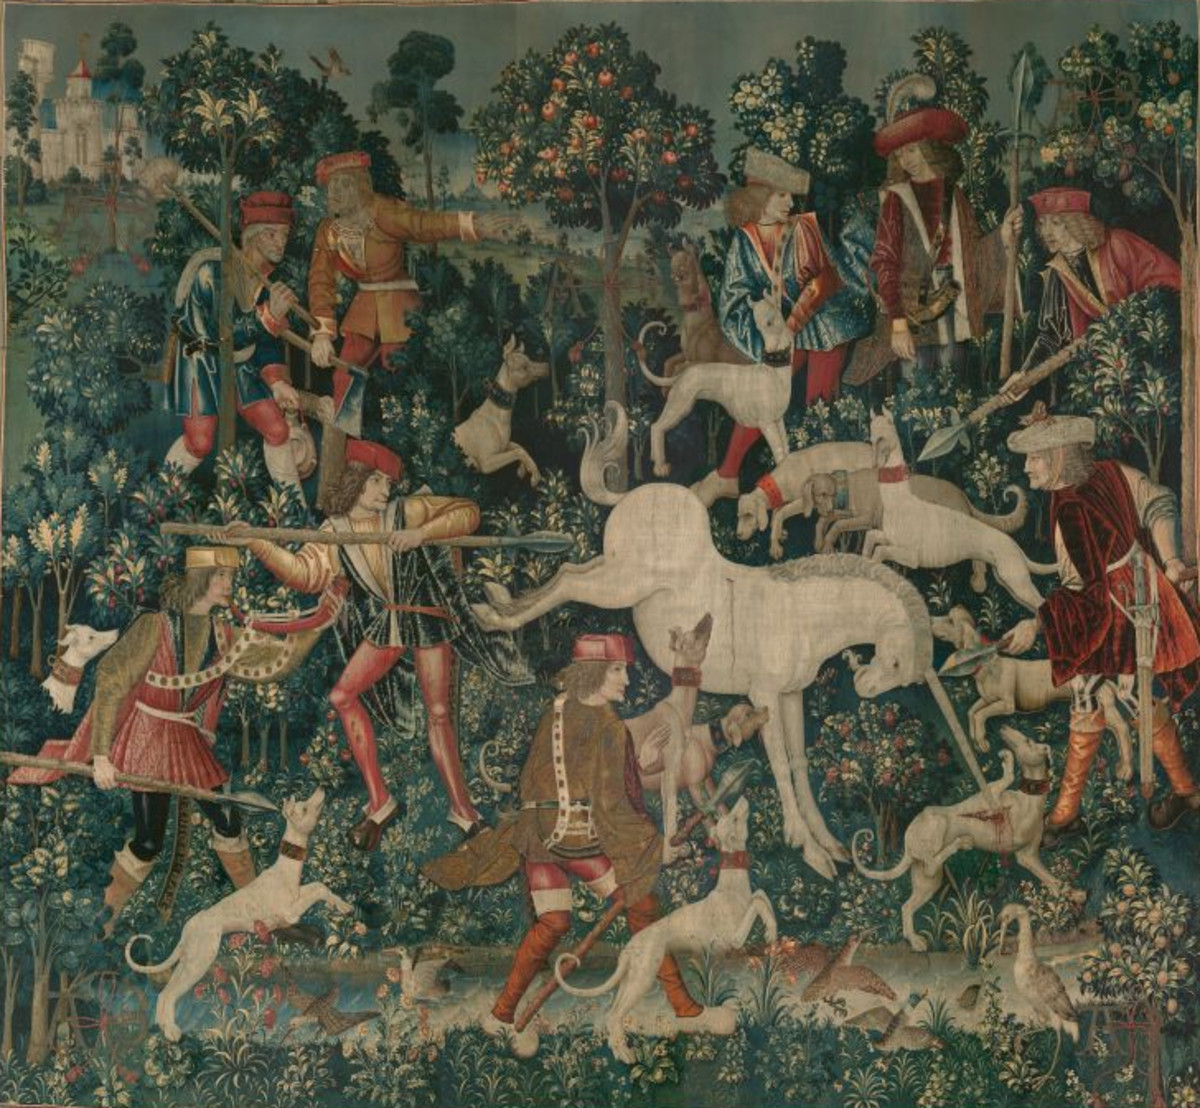 Tapestry 4: The Unicorn Defends Itself. Here the injured unicorn is being held at bay by three hunters ready to pierce him with their lances. He gores a greyhound with his horn and kicks at one of the huntsmen. The huntsmen and other figures are garbed in the fashions of the turn of the sixteenth century and their headdresses and hairstyles also reflect contemporary tastes. The mastery of the weavers is evident in the representation of different materials and textures in the costumes, such as brocade, velvet, leather, and fur.